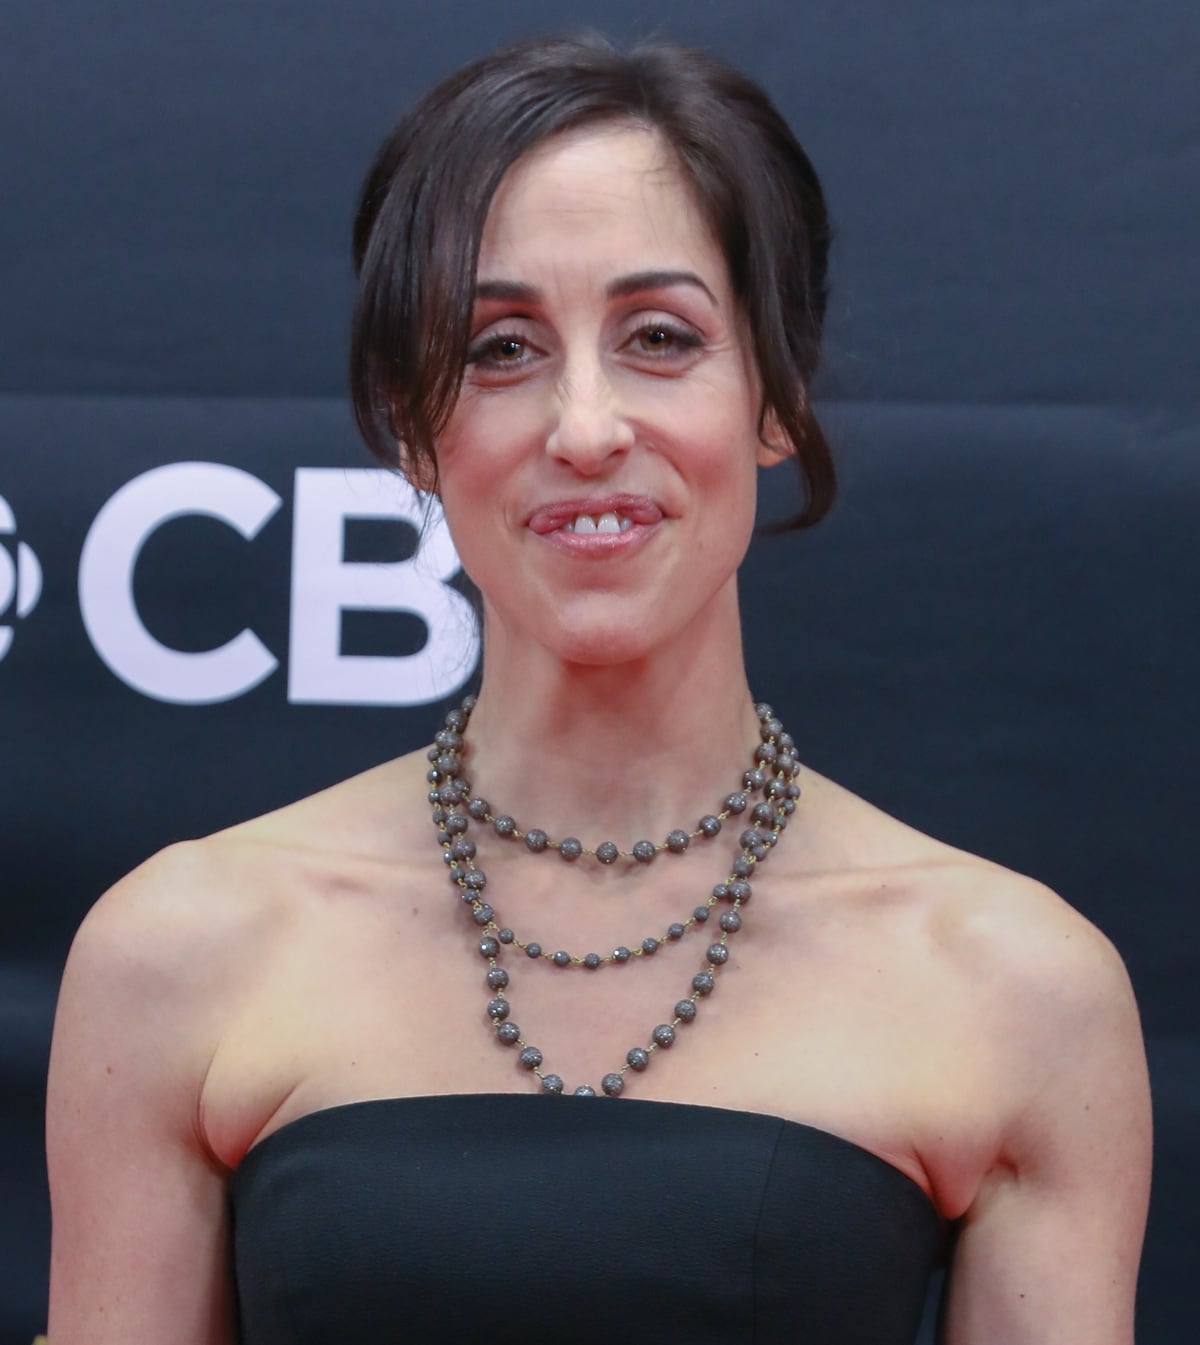 Some fans believe Catherine Reitman's unique mouth shape is due to upper lip surgery